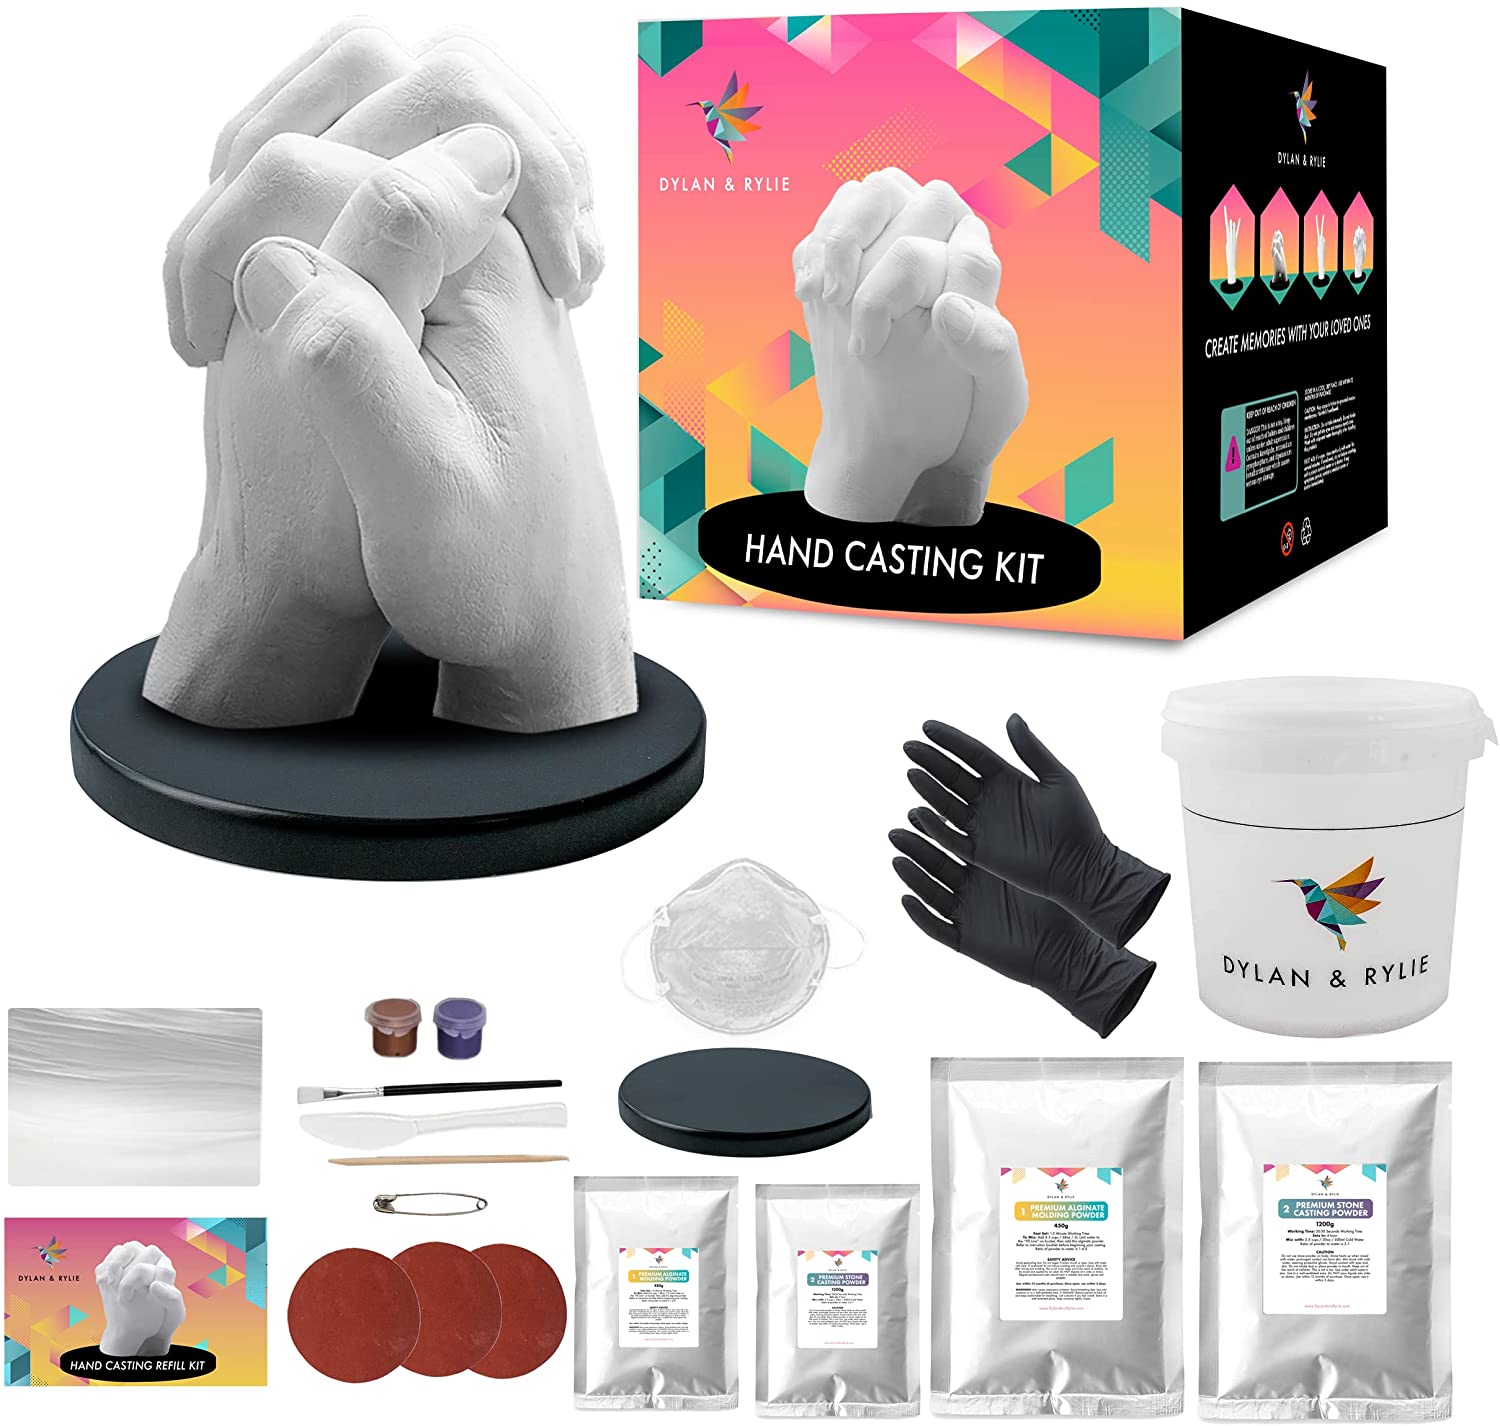 Hands Casting Kit DIY Hand molding Kit Hand Holding Craft for Couples